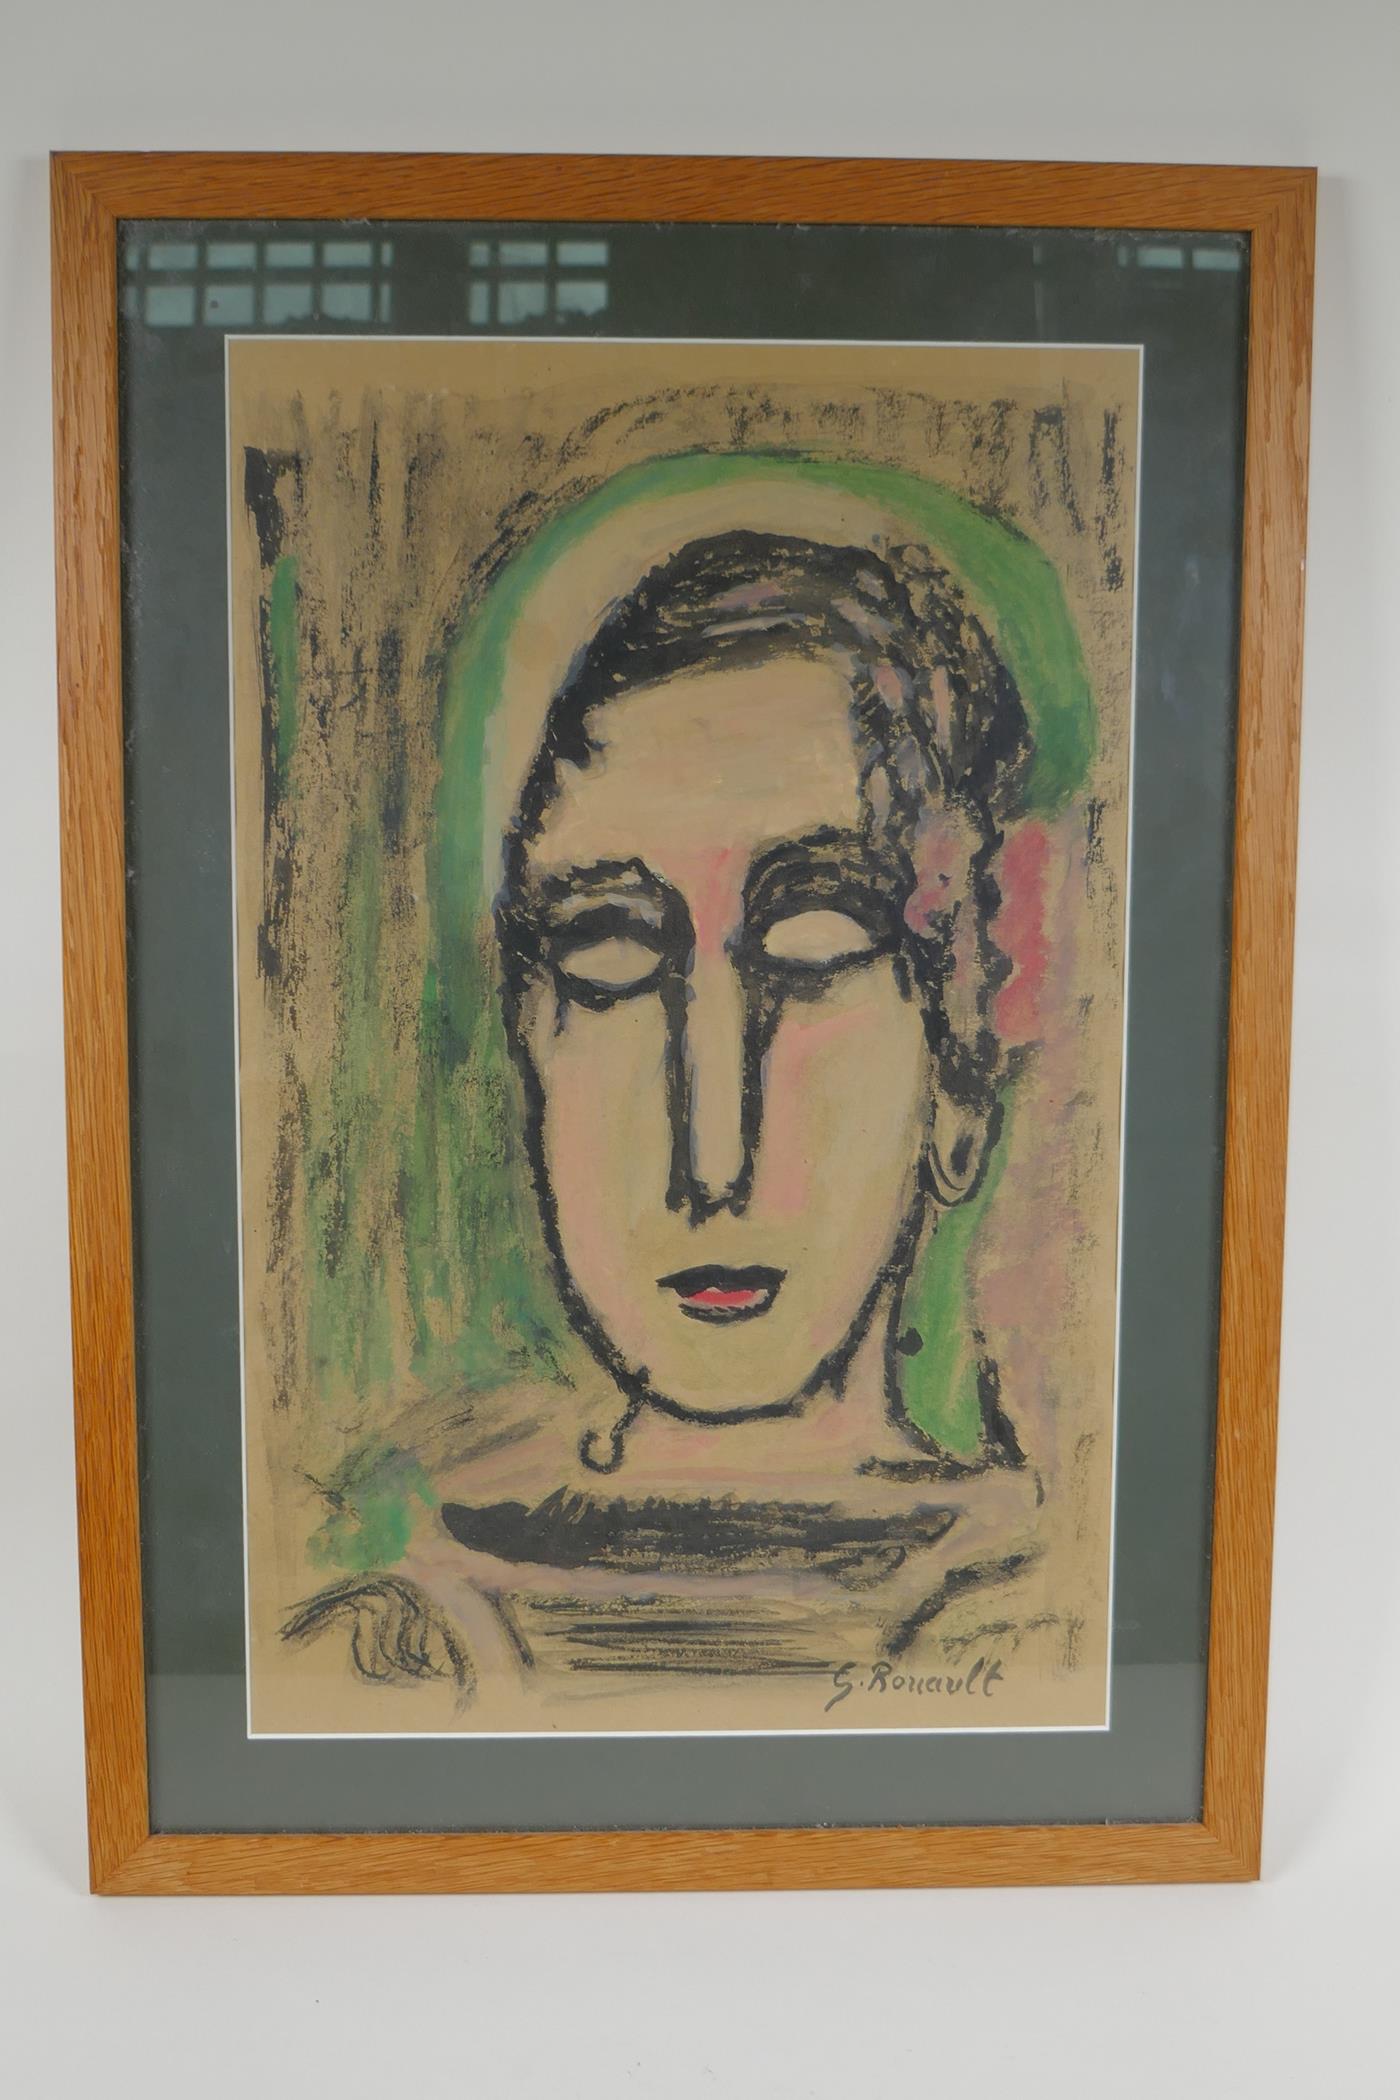 After George Rouault, (French, 1871-1958), portrait of a lady, hand finished lithograph, 30 x 48cm - Image 2 of 3